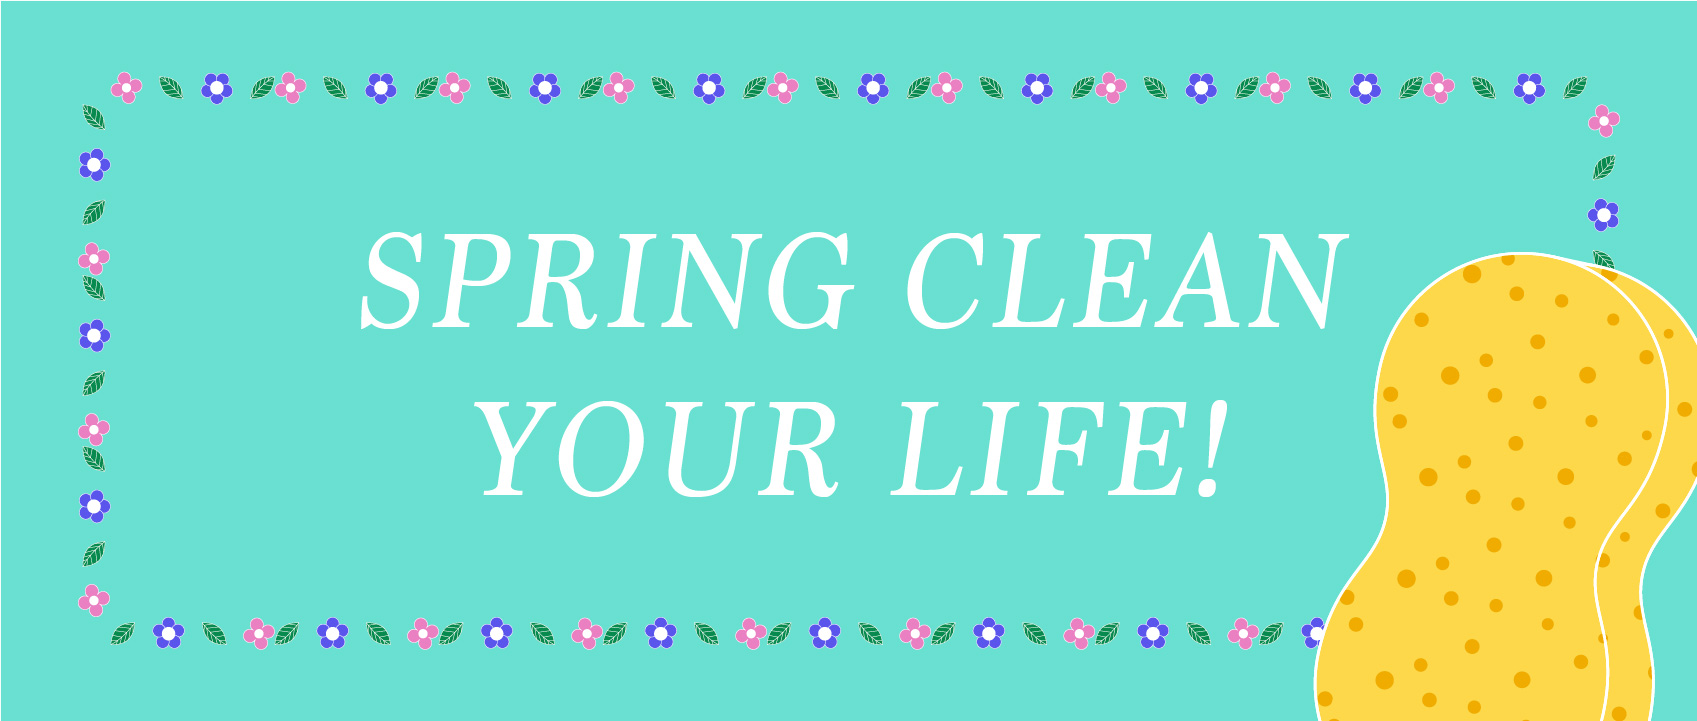 spring clean your life text, illustrations of flowers, leaves and sponge